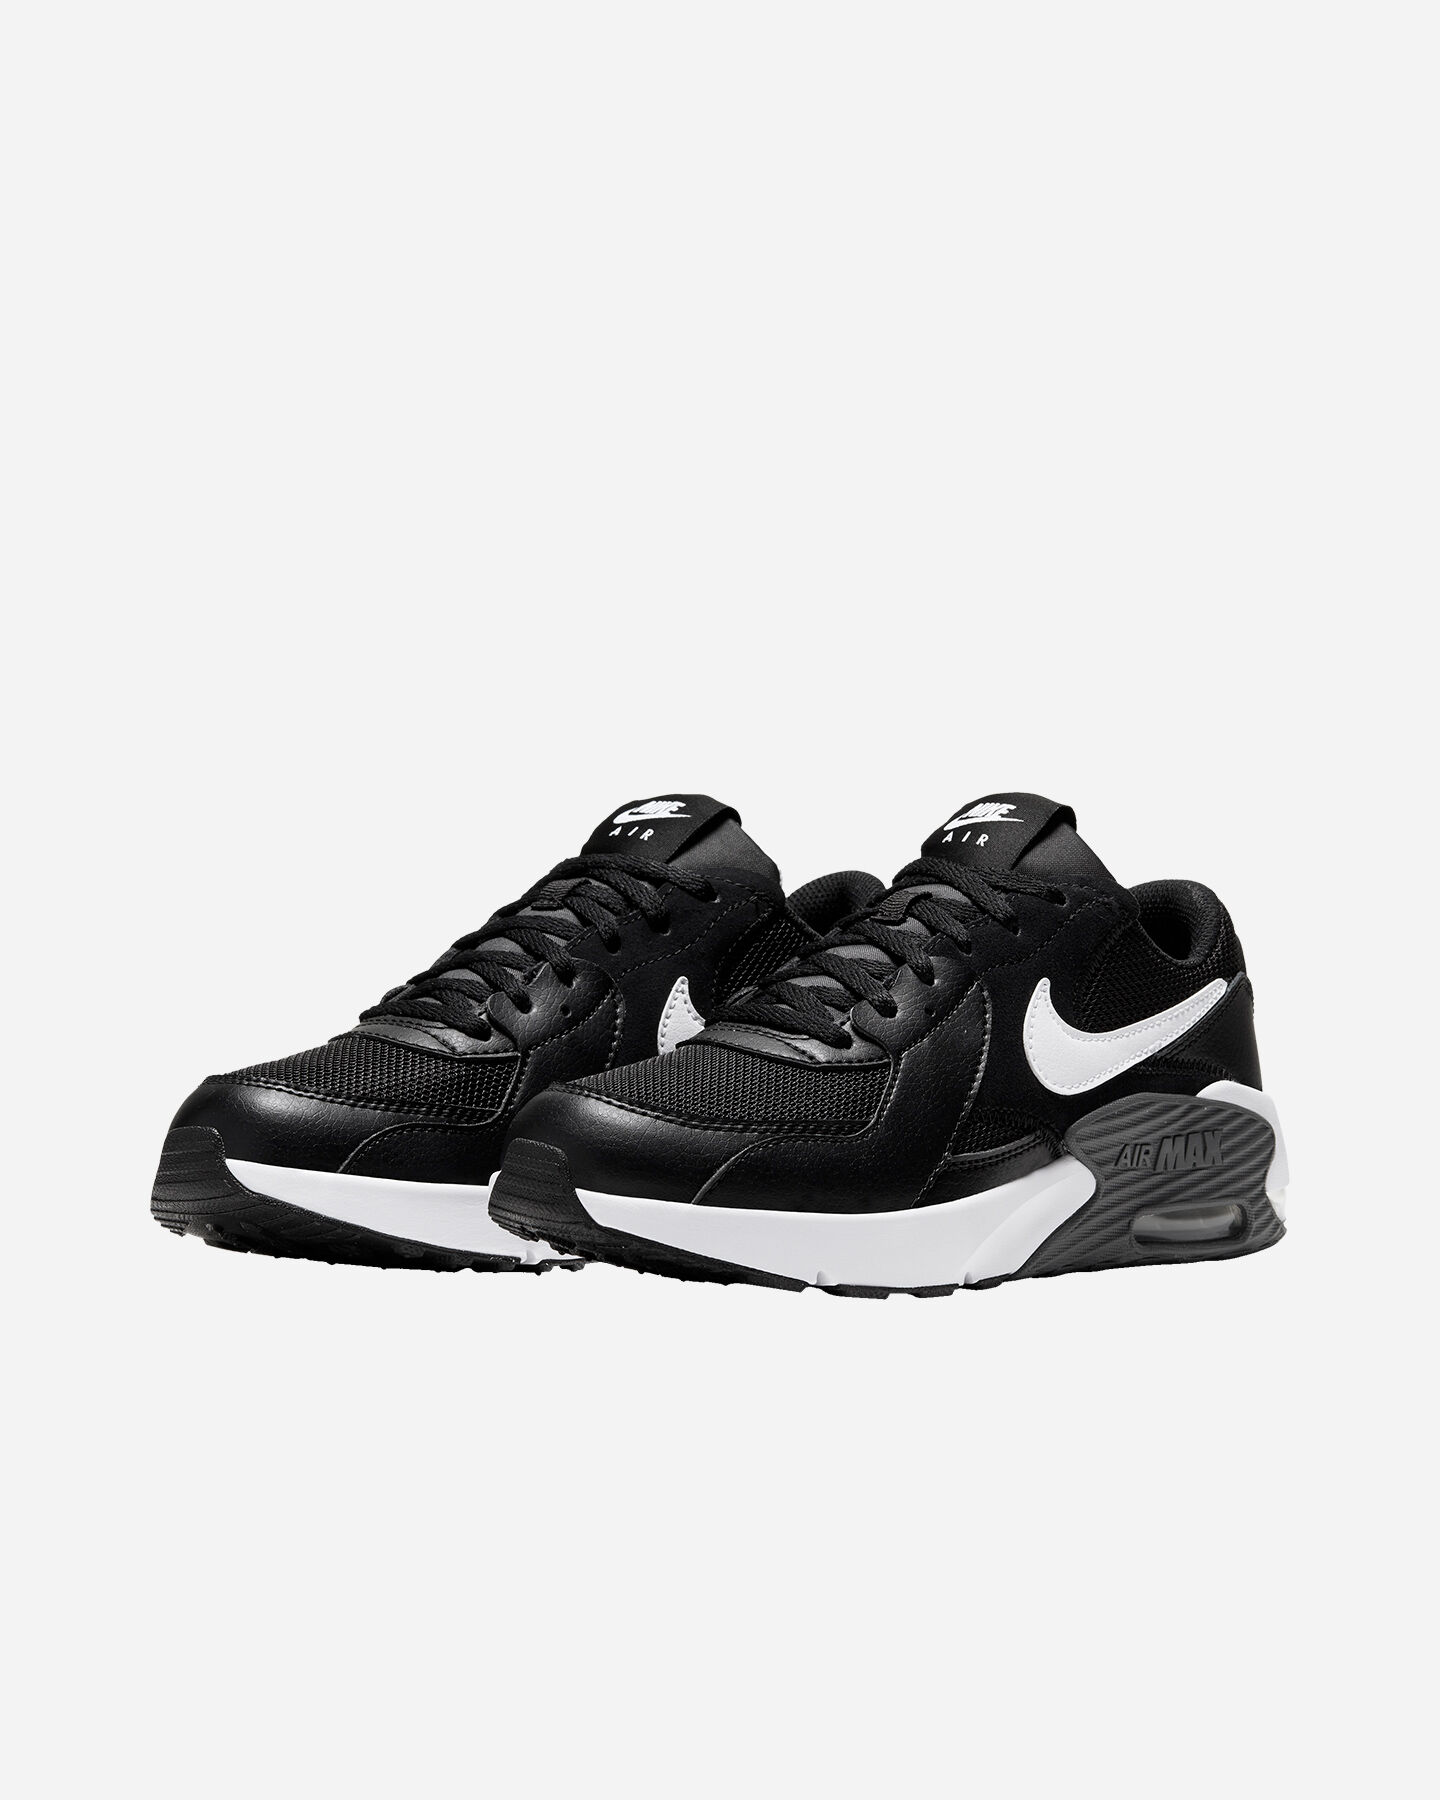  Scarpe sneakers NIKE AIR MAX EXCEE GS JR S5162124|001|6Y scatto 1